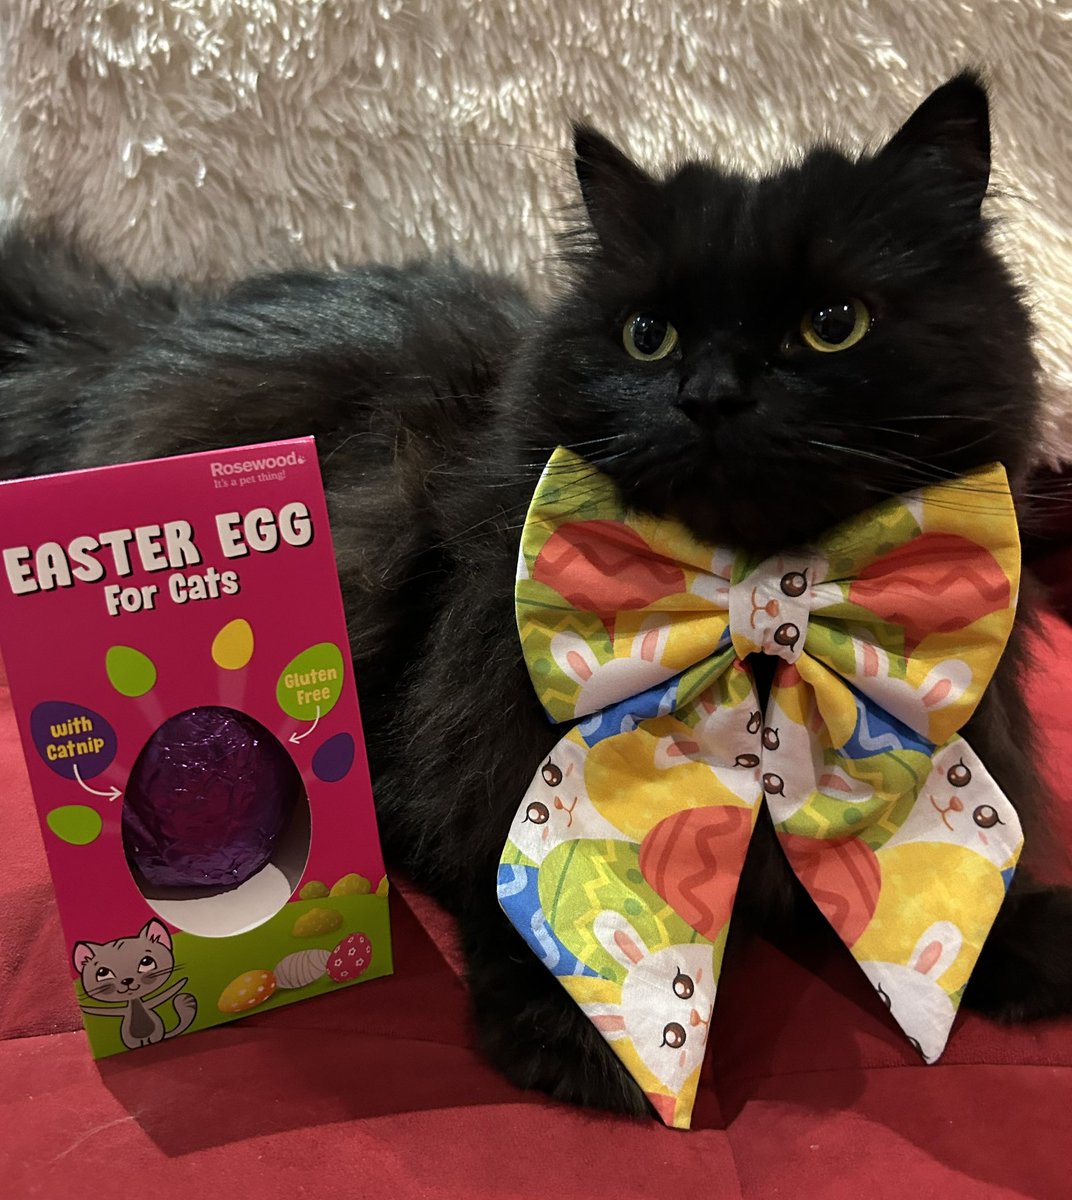 Meowy Easter! 🐾 #cat #eastersunday #catlife #easter #chocolateeggs #coolcat #meow